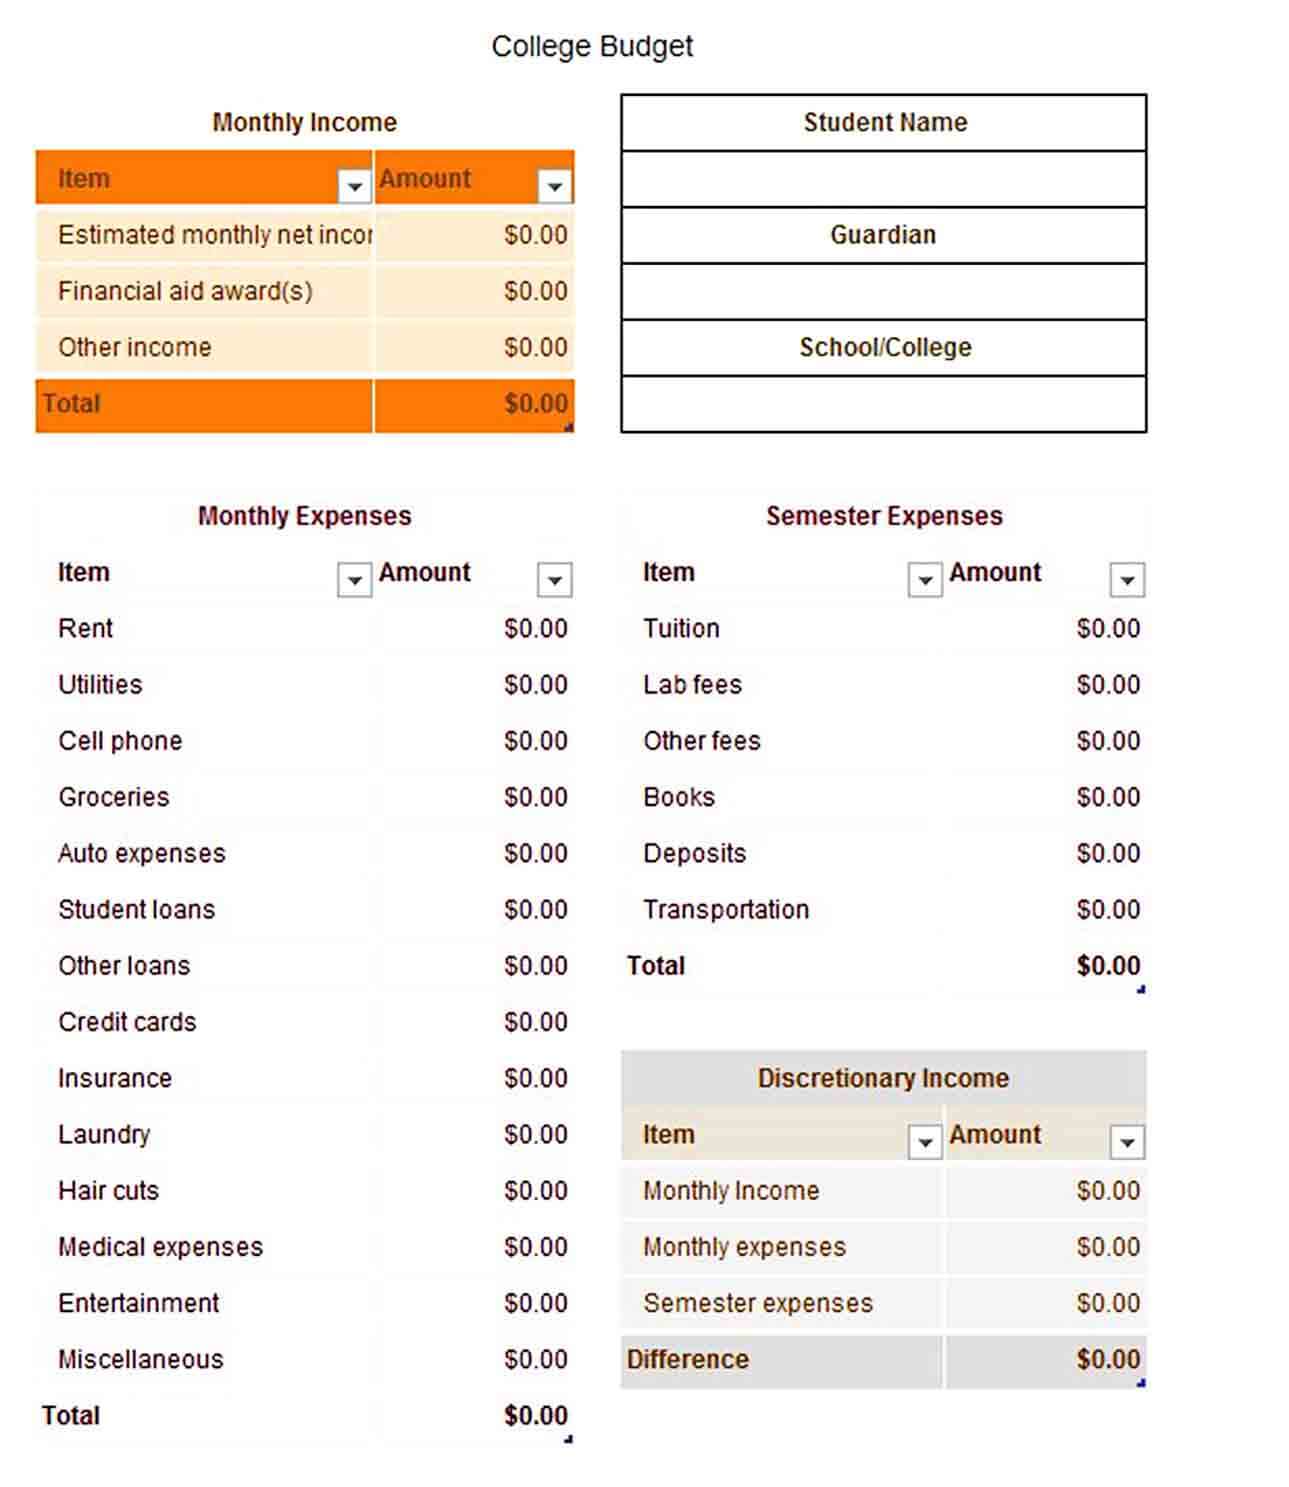 free college budget template